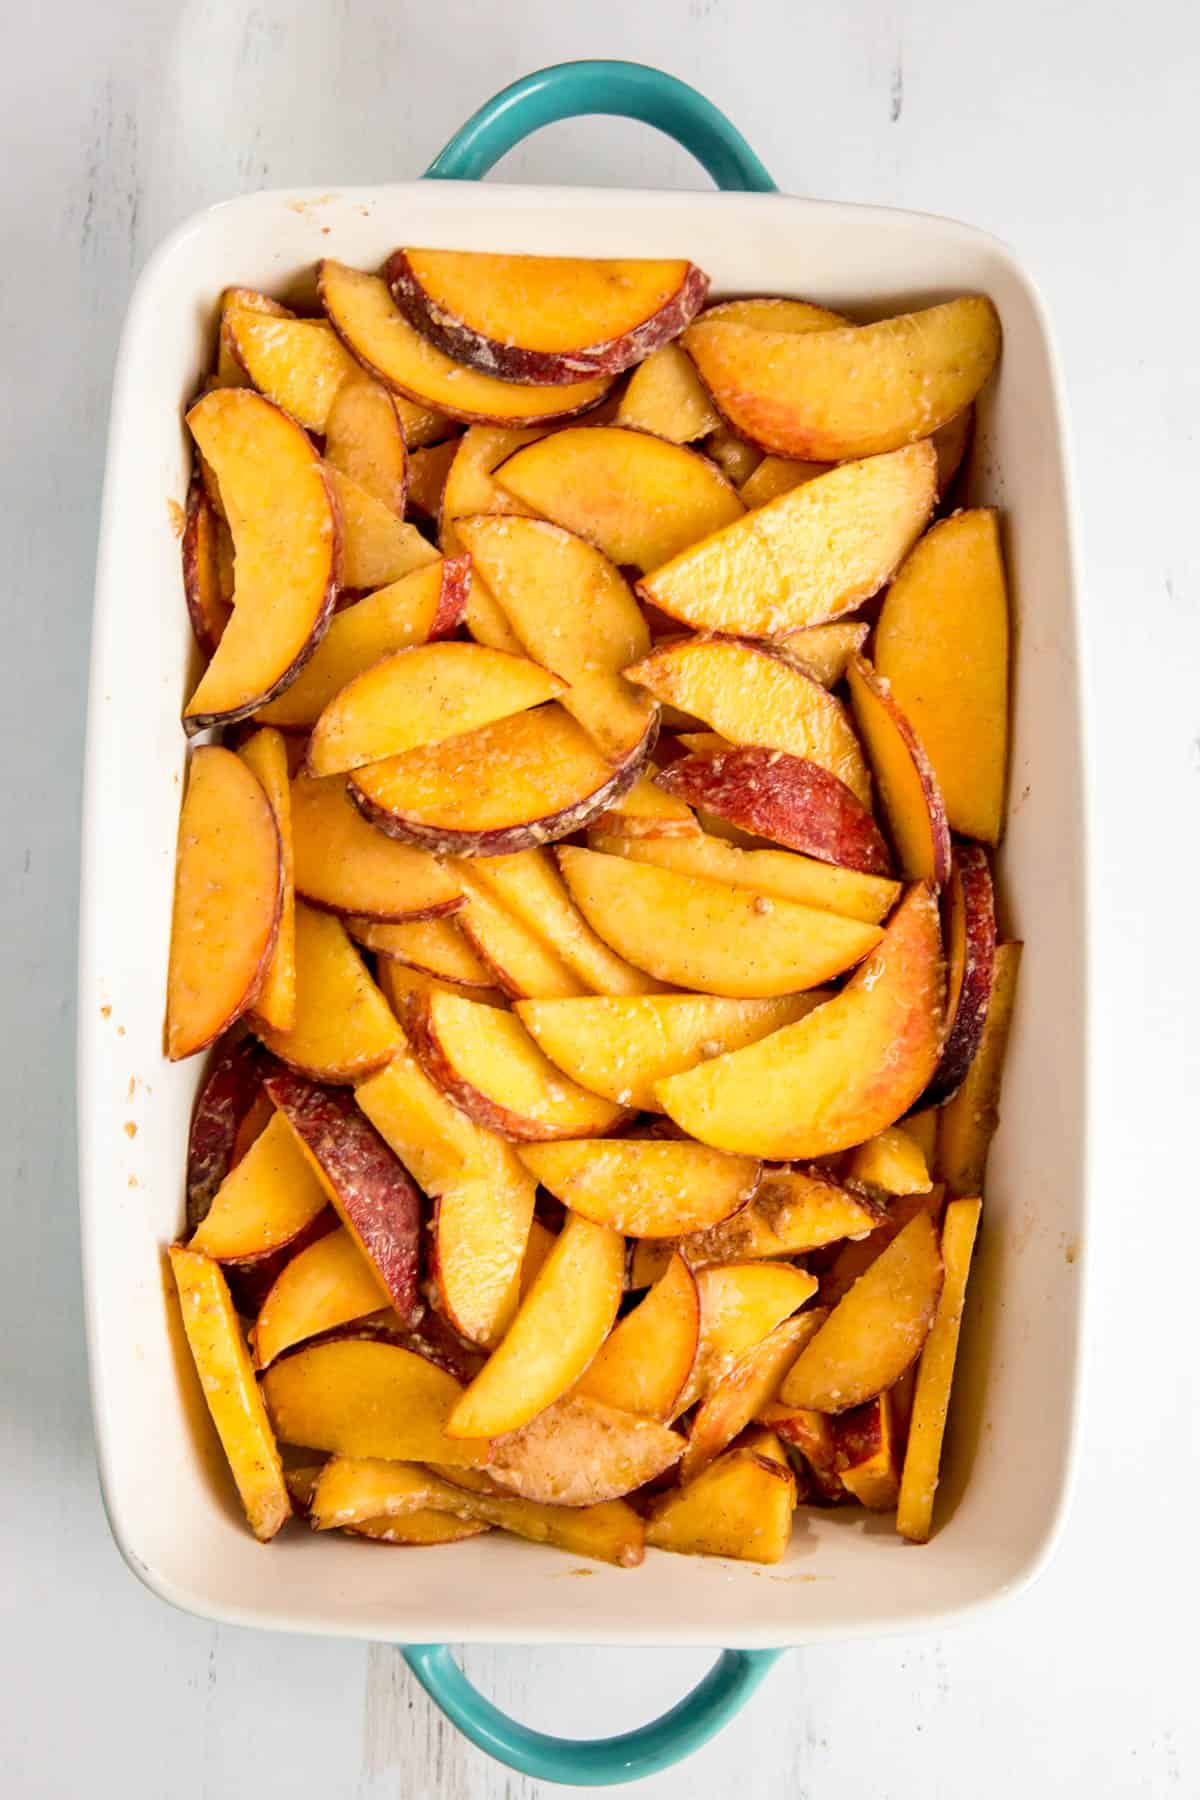 peaches in the baking dish